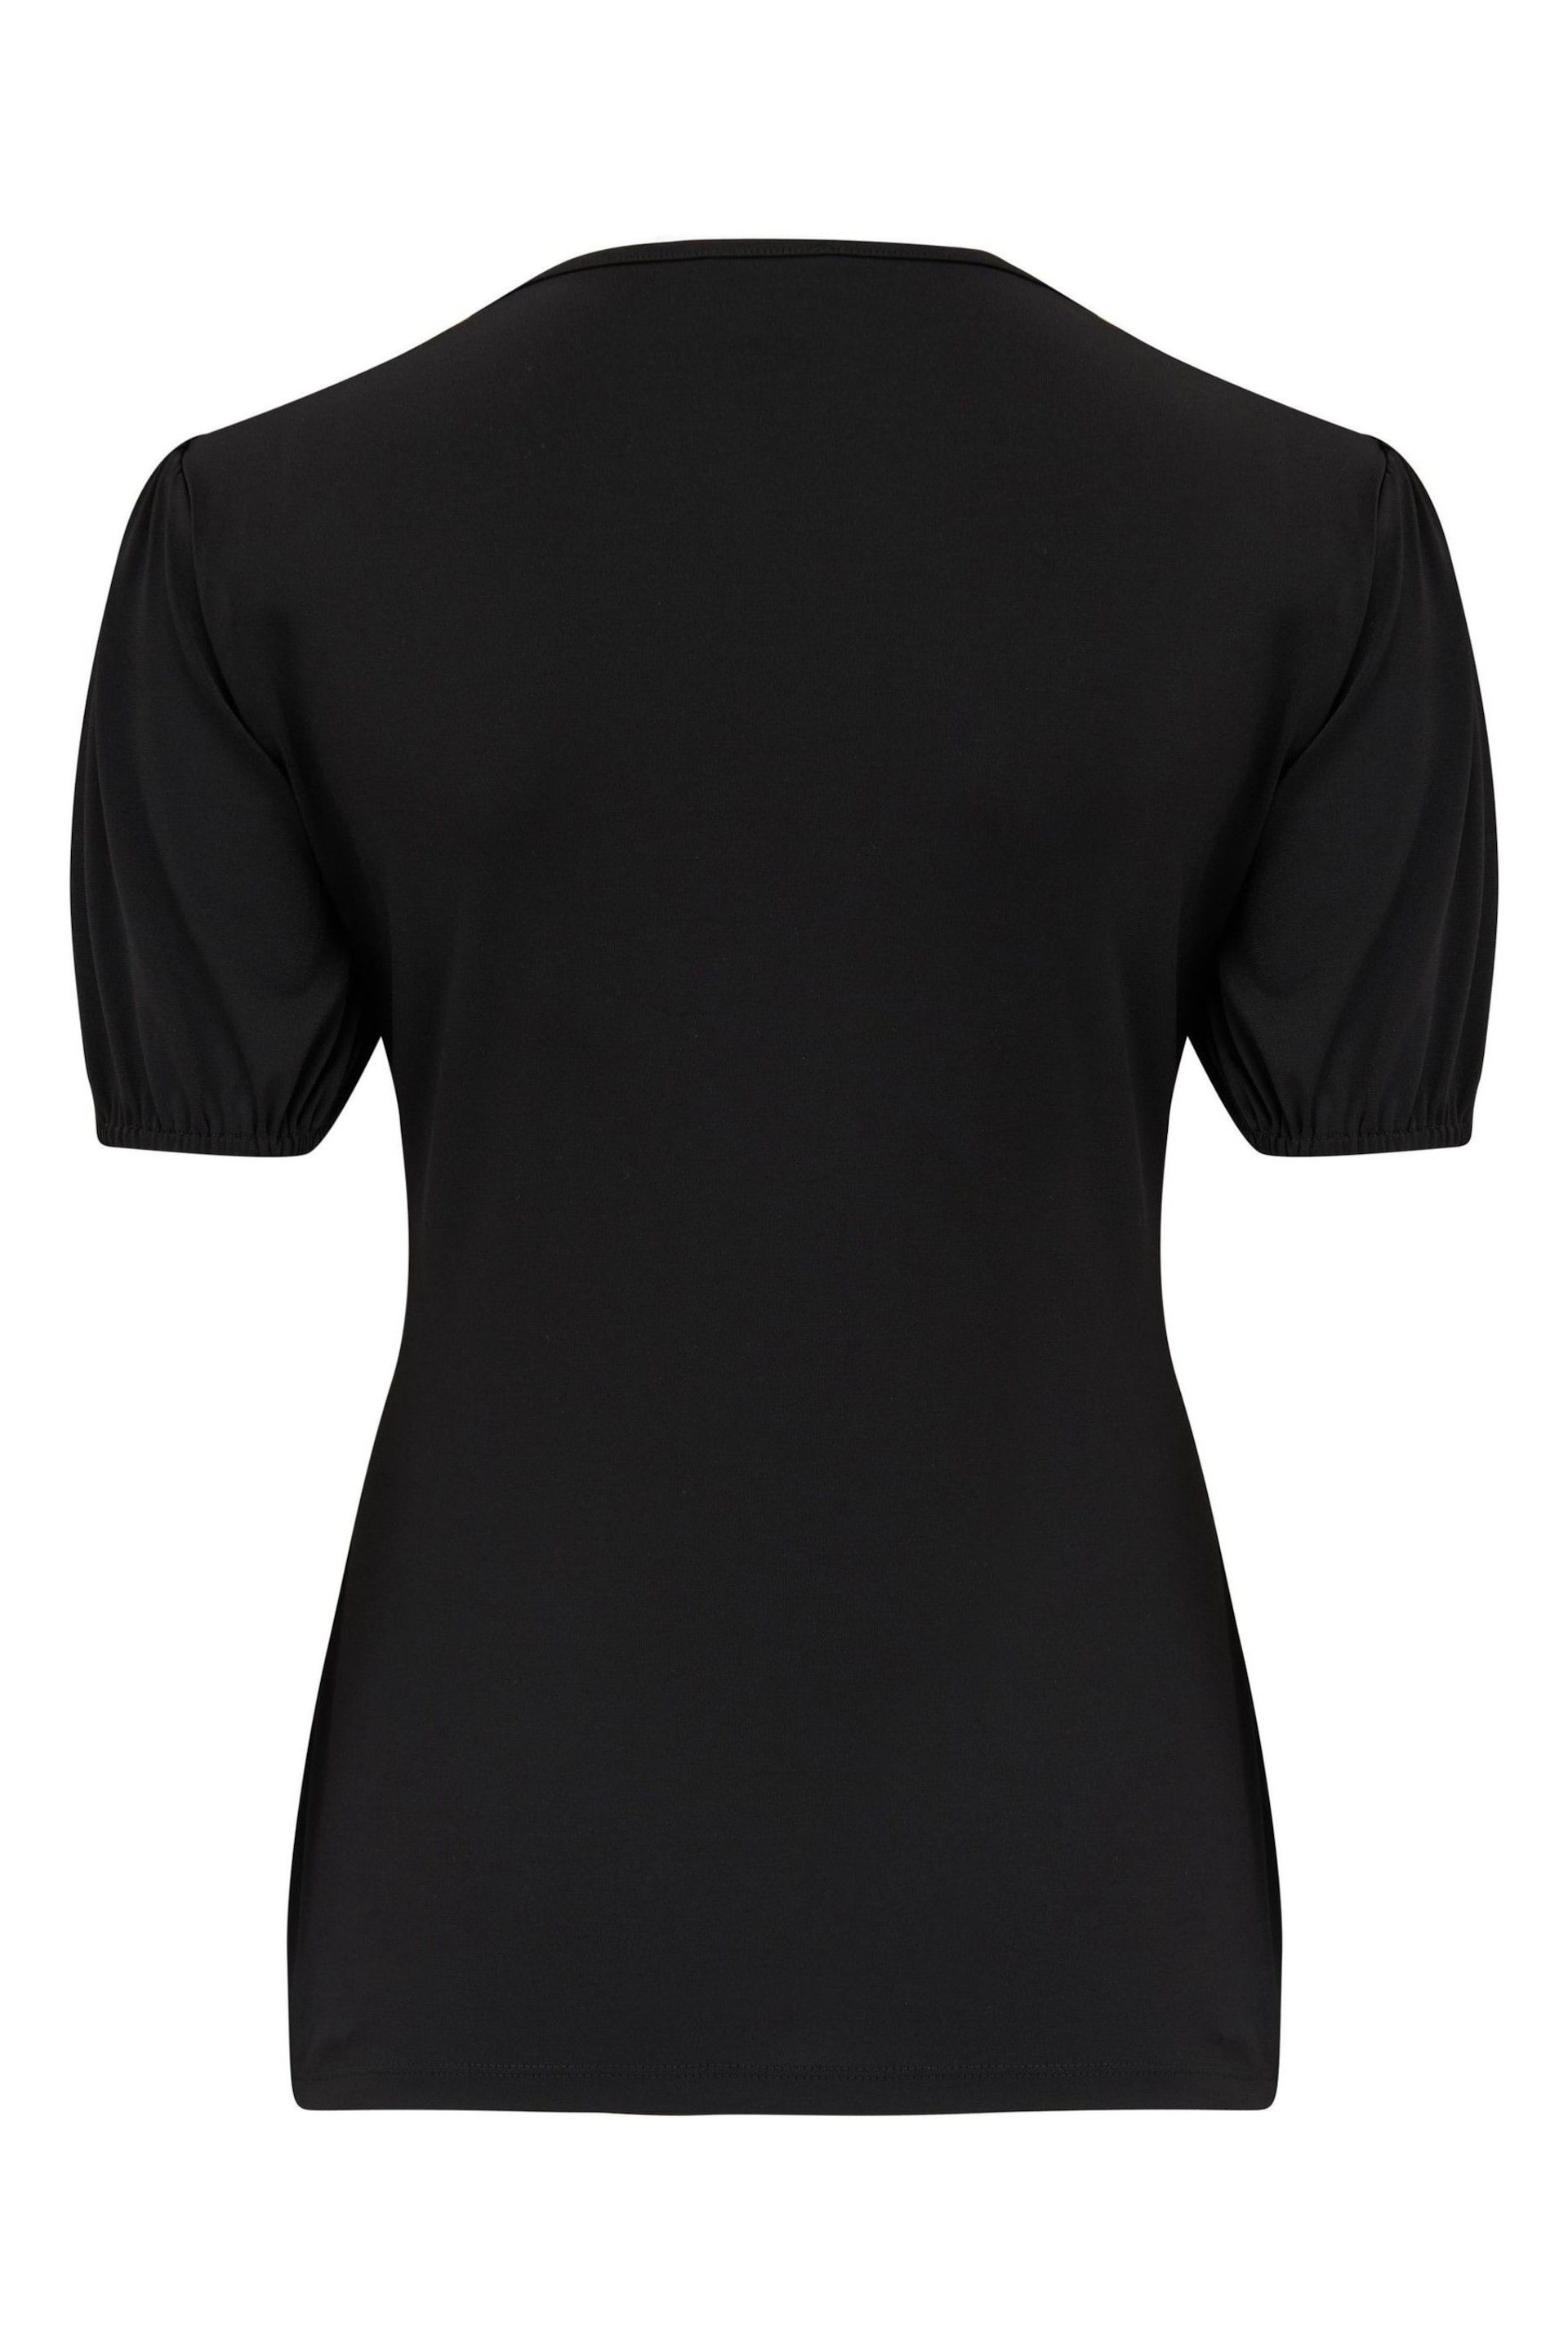 Pour Moi Black Birdie Square Neck Slinky Puff Sleeve Stretch Top - Image 4 of 4